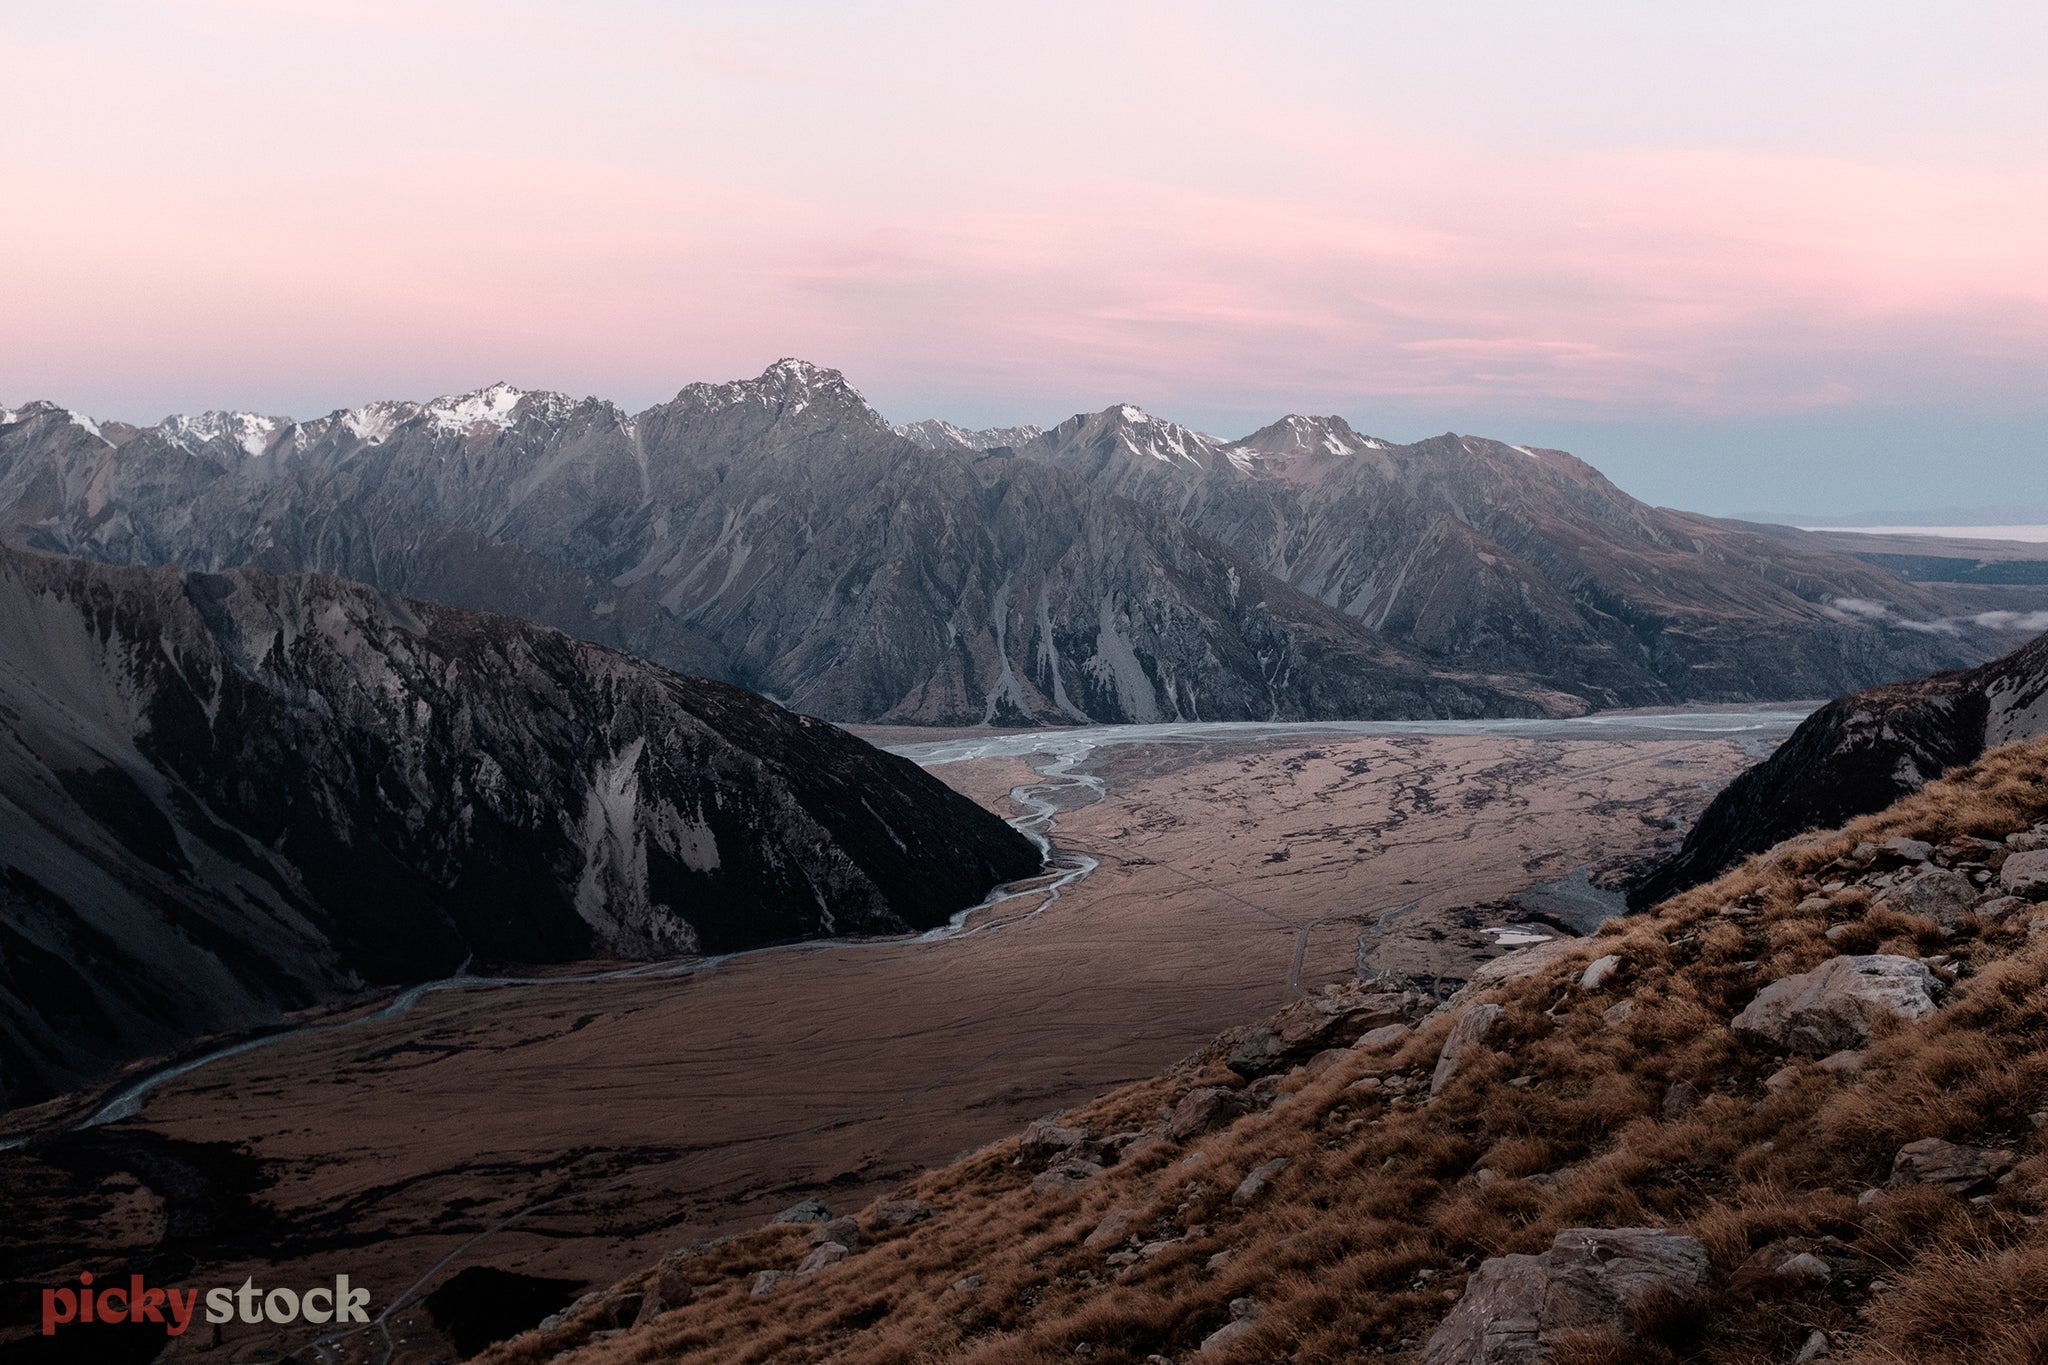 Looking out from a tussock ridge line towards the snow covered mountain peaks of the Hooker Valley. The light is turning pink as the sun is setting. 